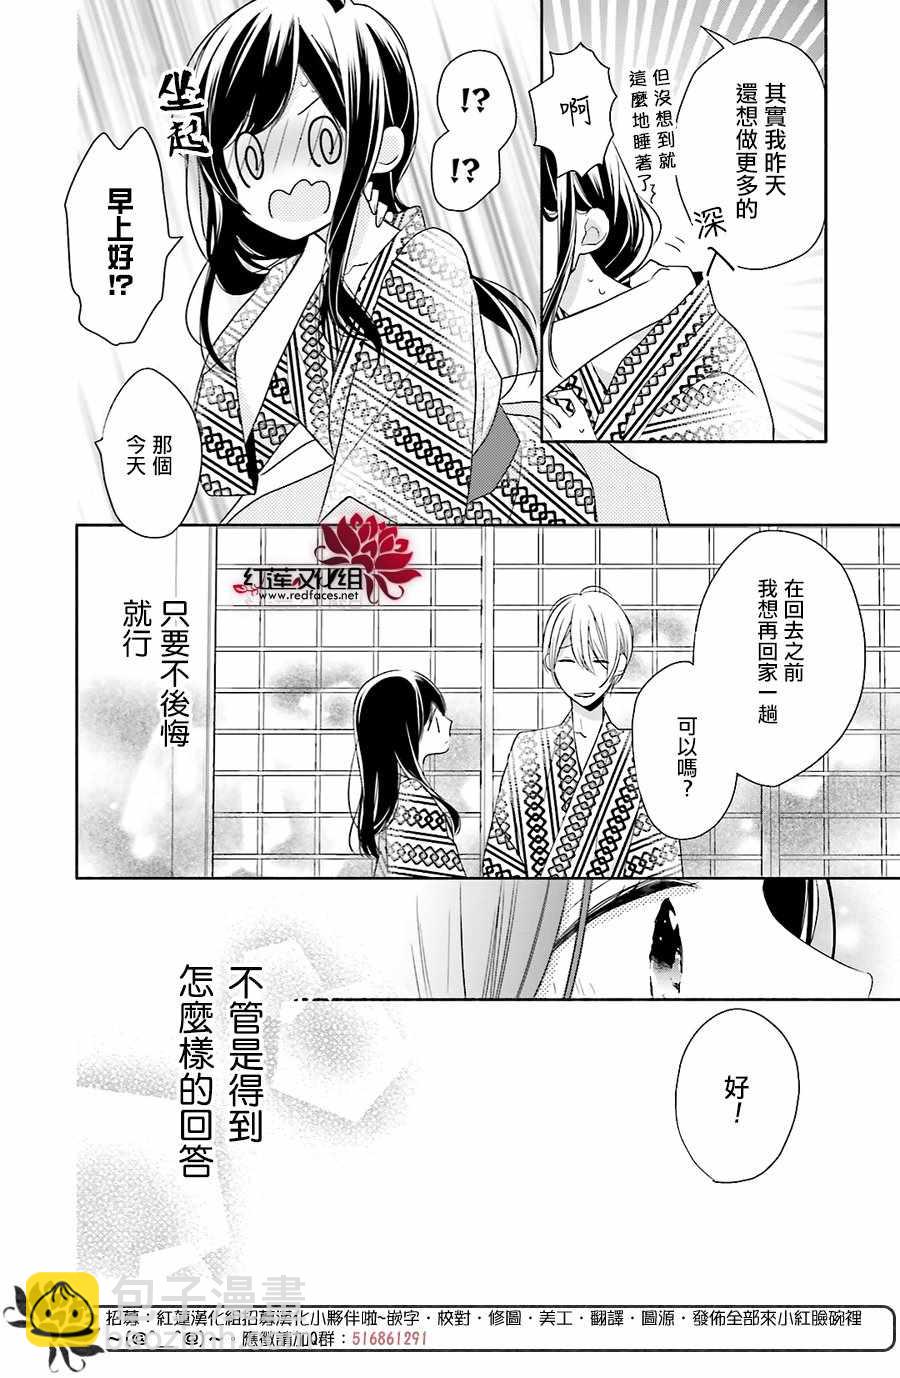 If given a second chance - 11话 - 7